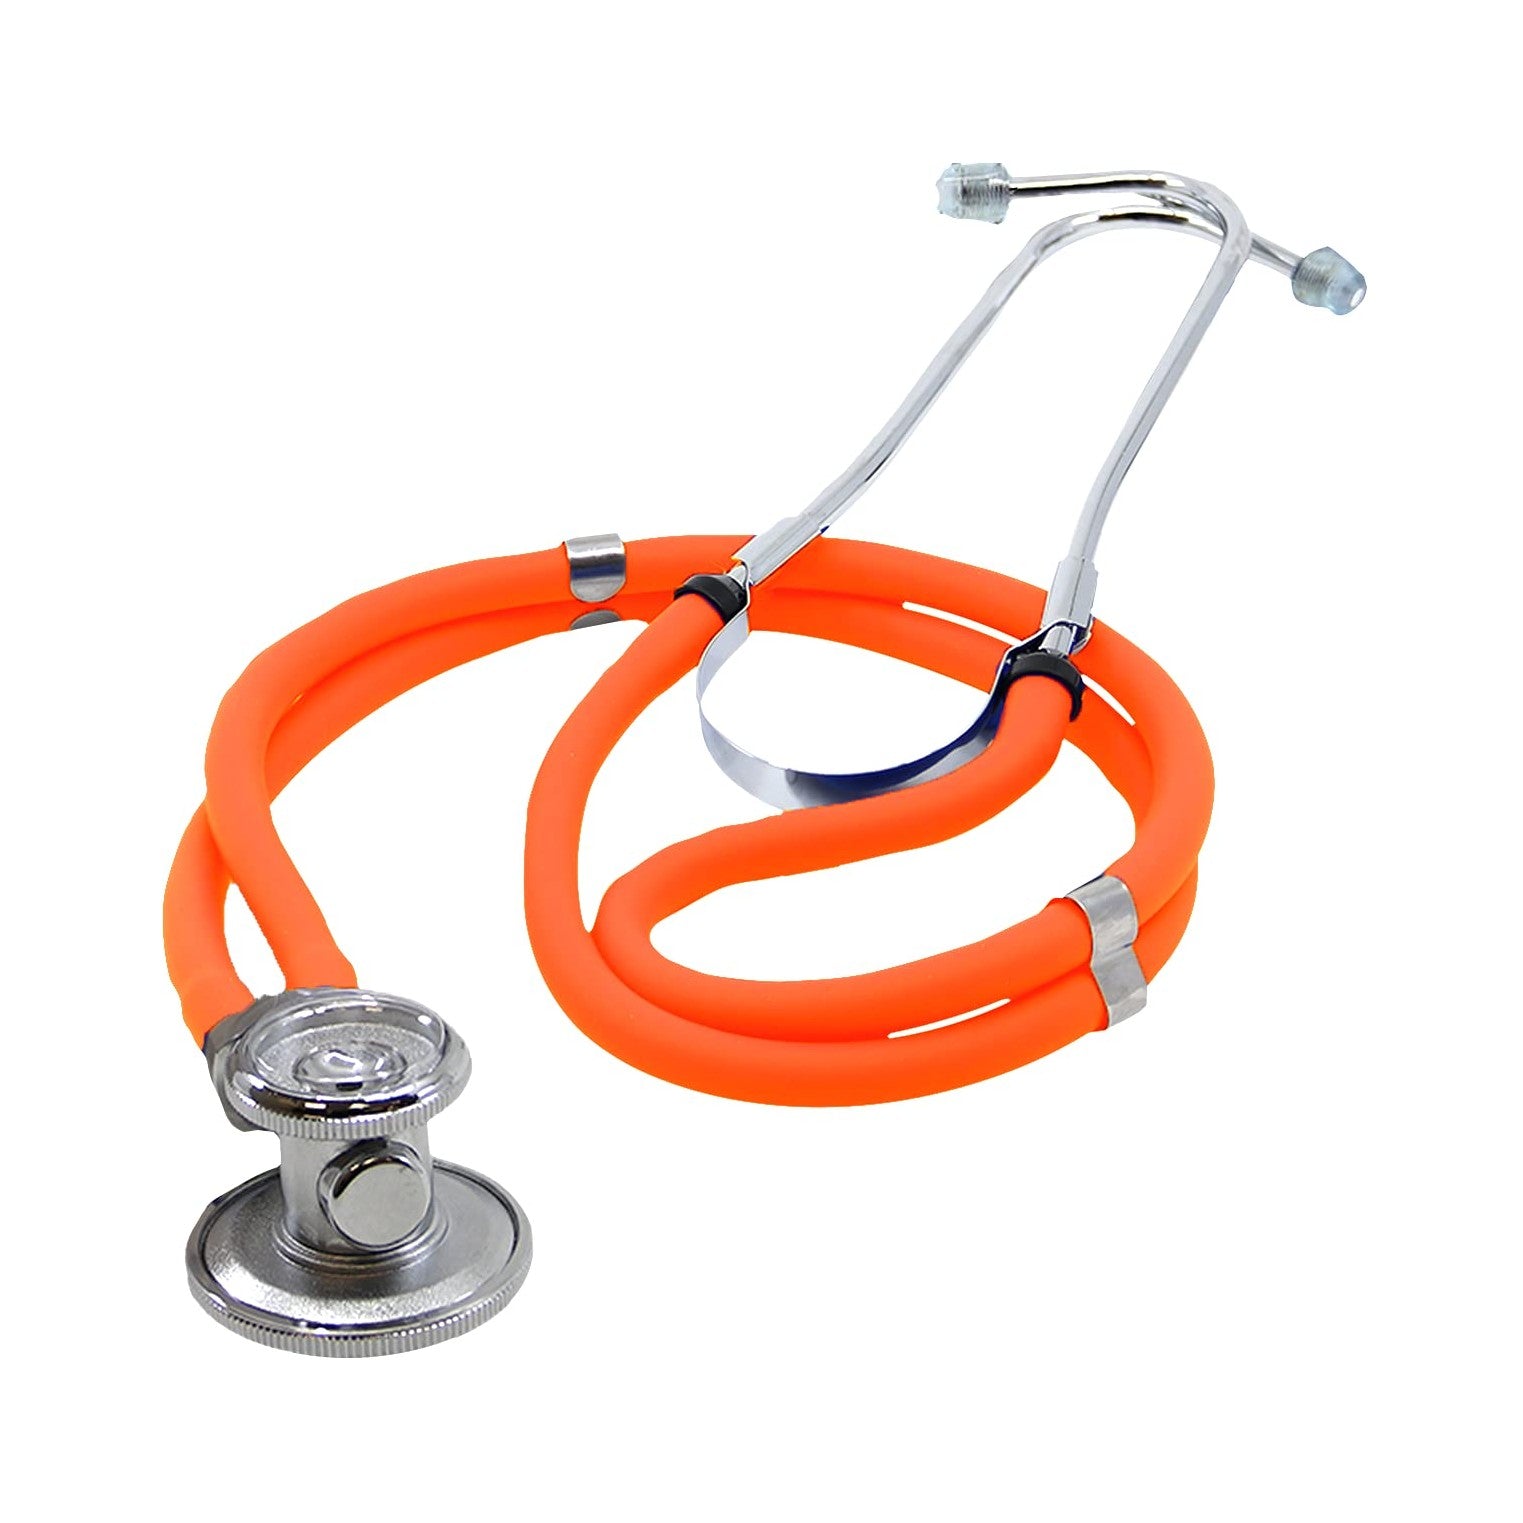 Dixie Ems Sprague-Rappaport Two Tube Type Stethoscope